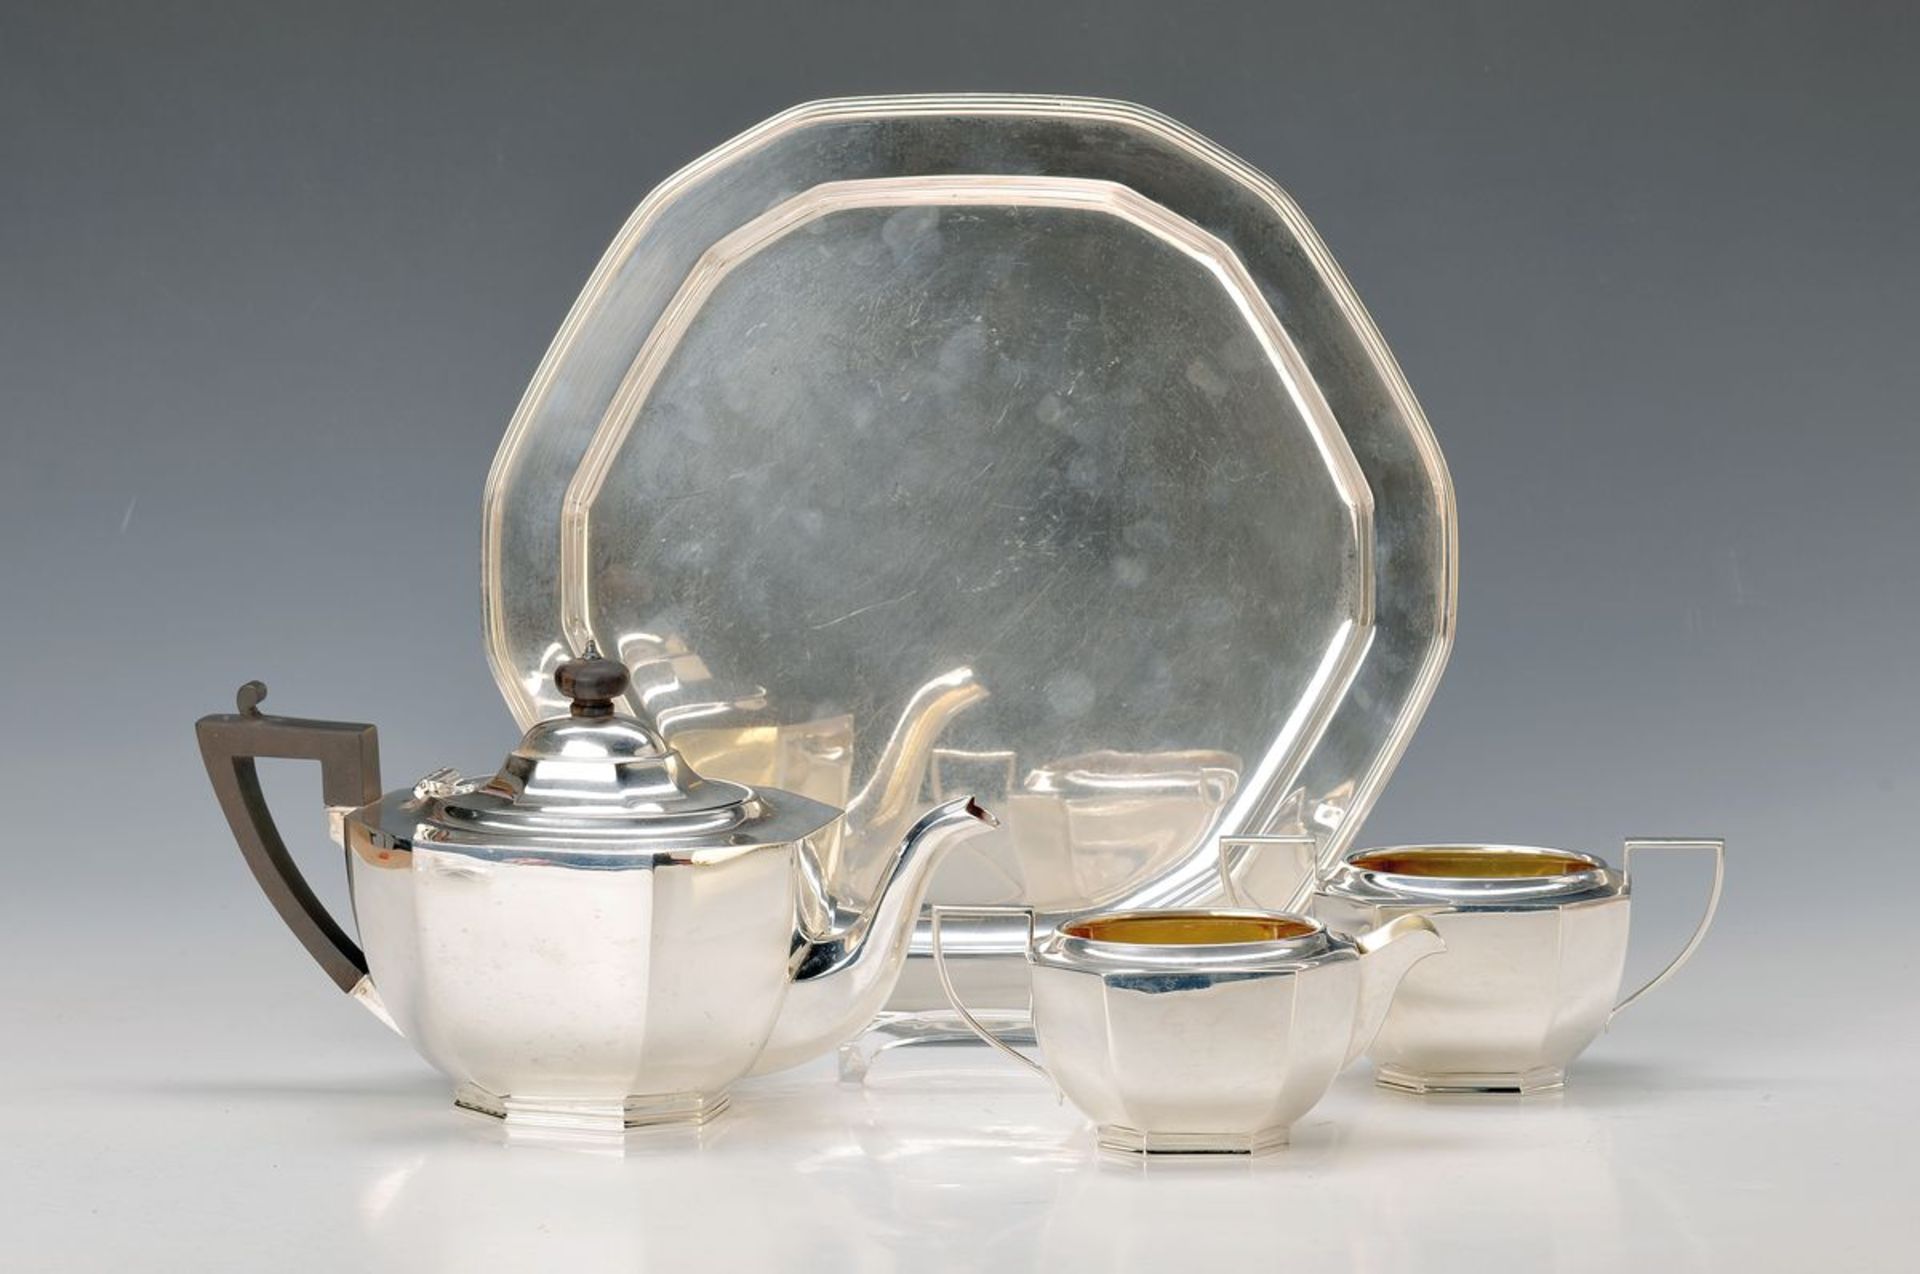 Tiffany tray with Tea set Birks, USA Mid 20th c., Sterling silver in Victorian style, 1x hexagonal